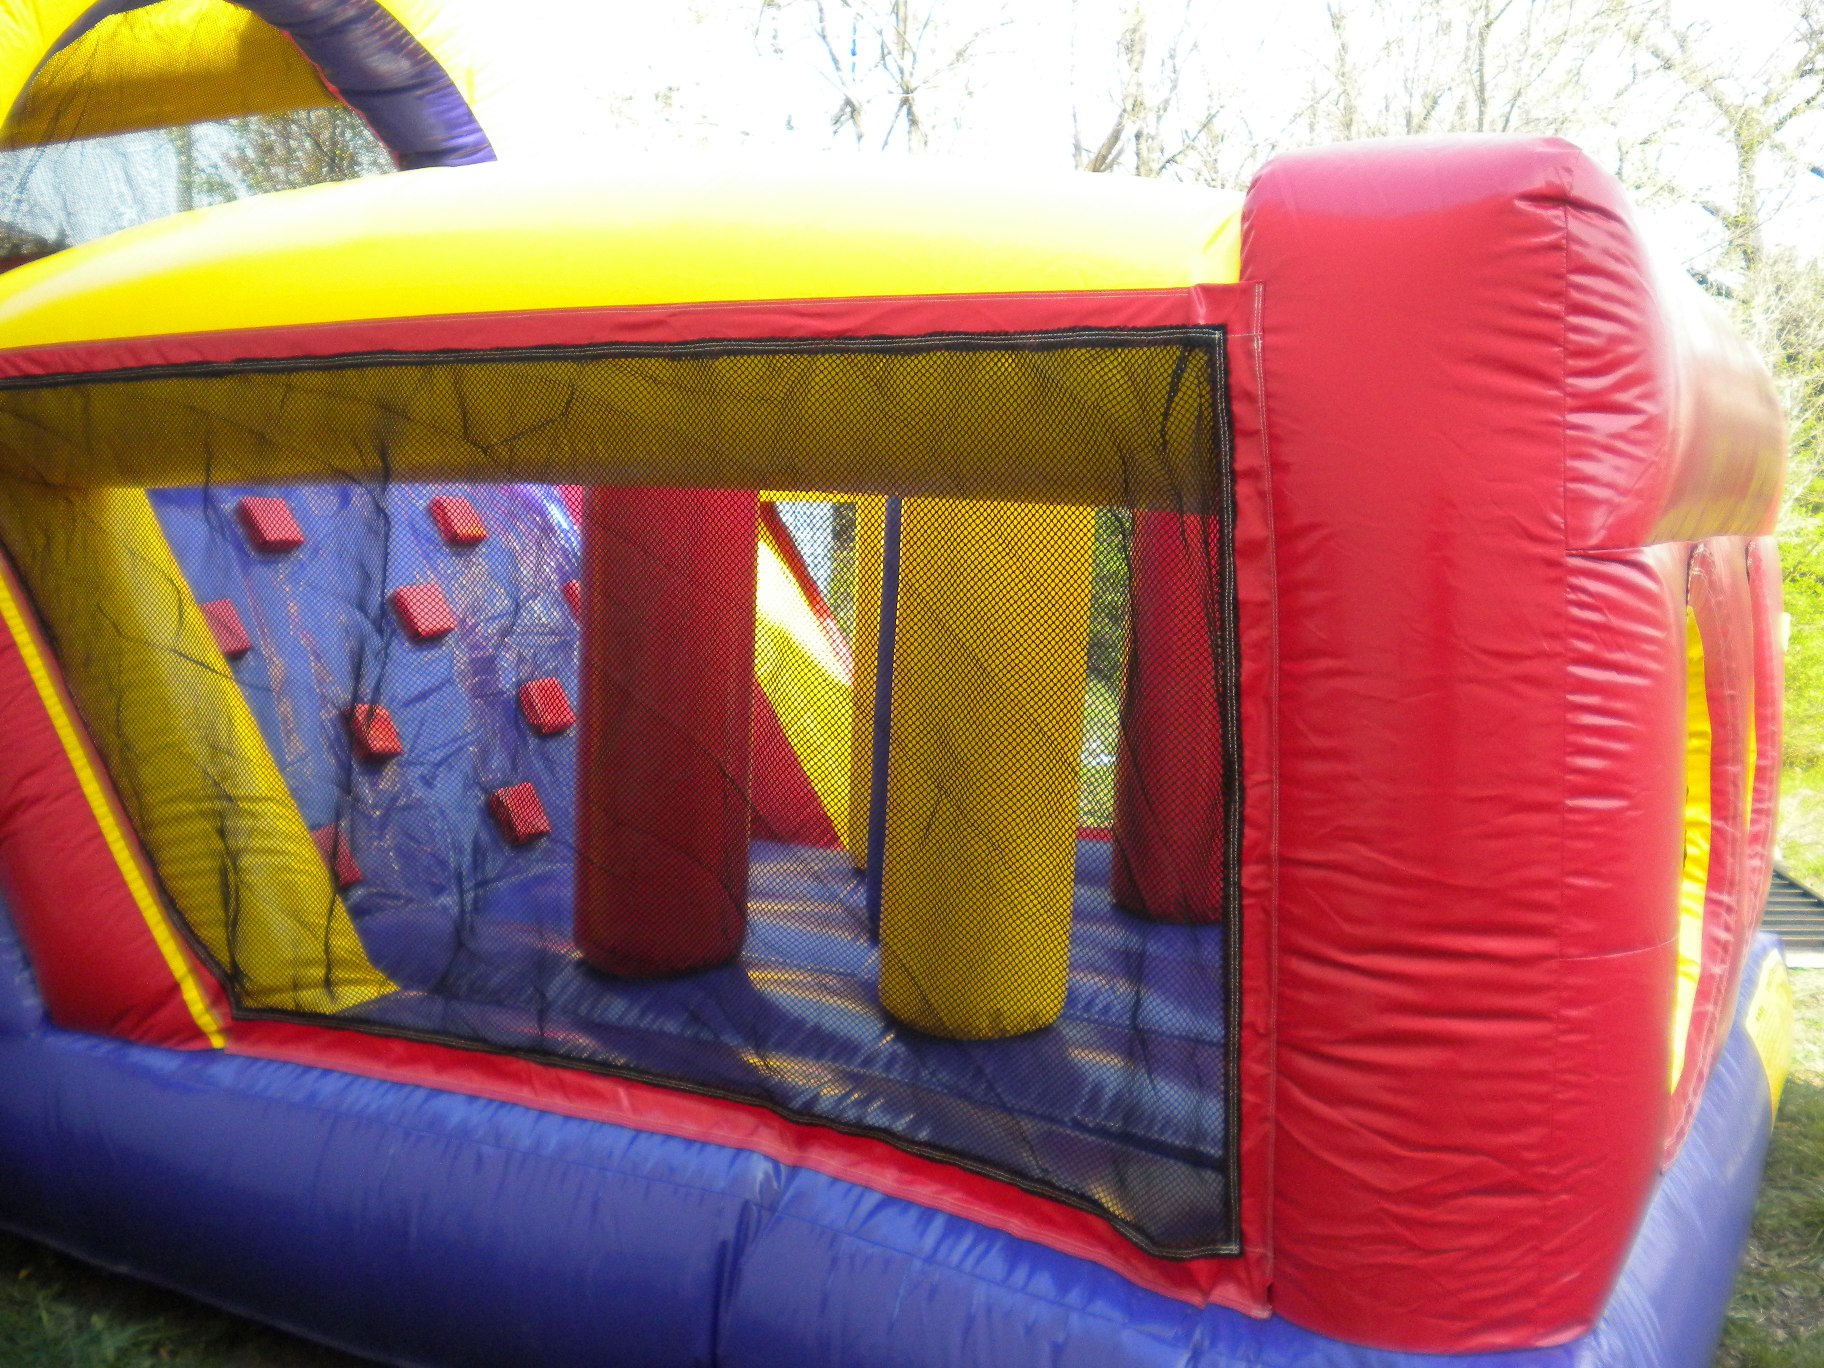 Rear Internal view of 40' Backyard Obstacle Challenge Inflatable Moonbounce